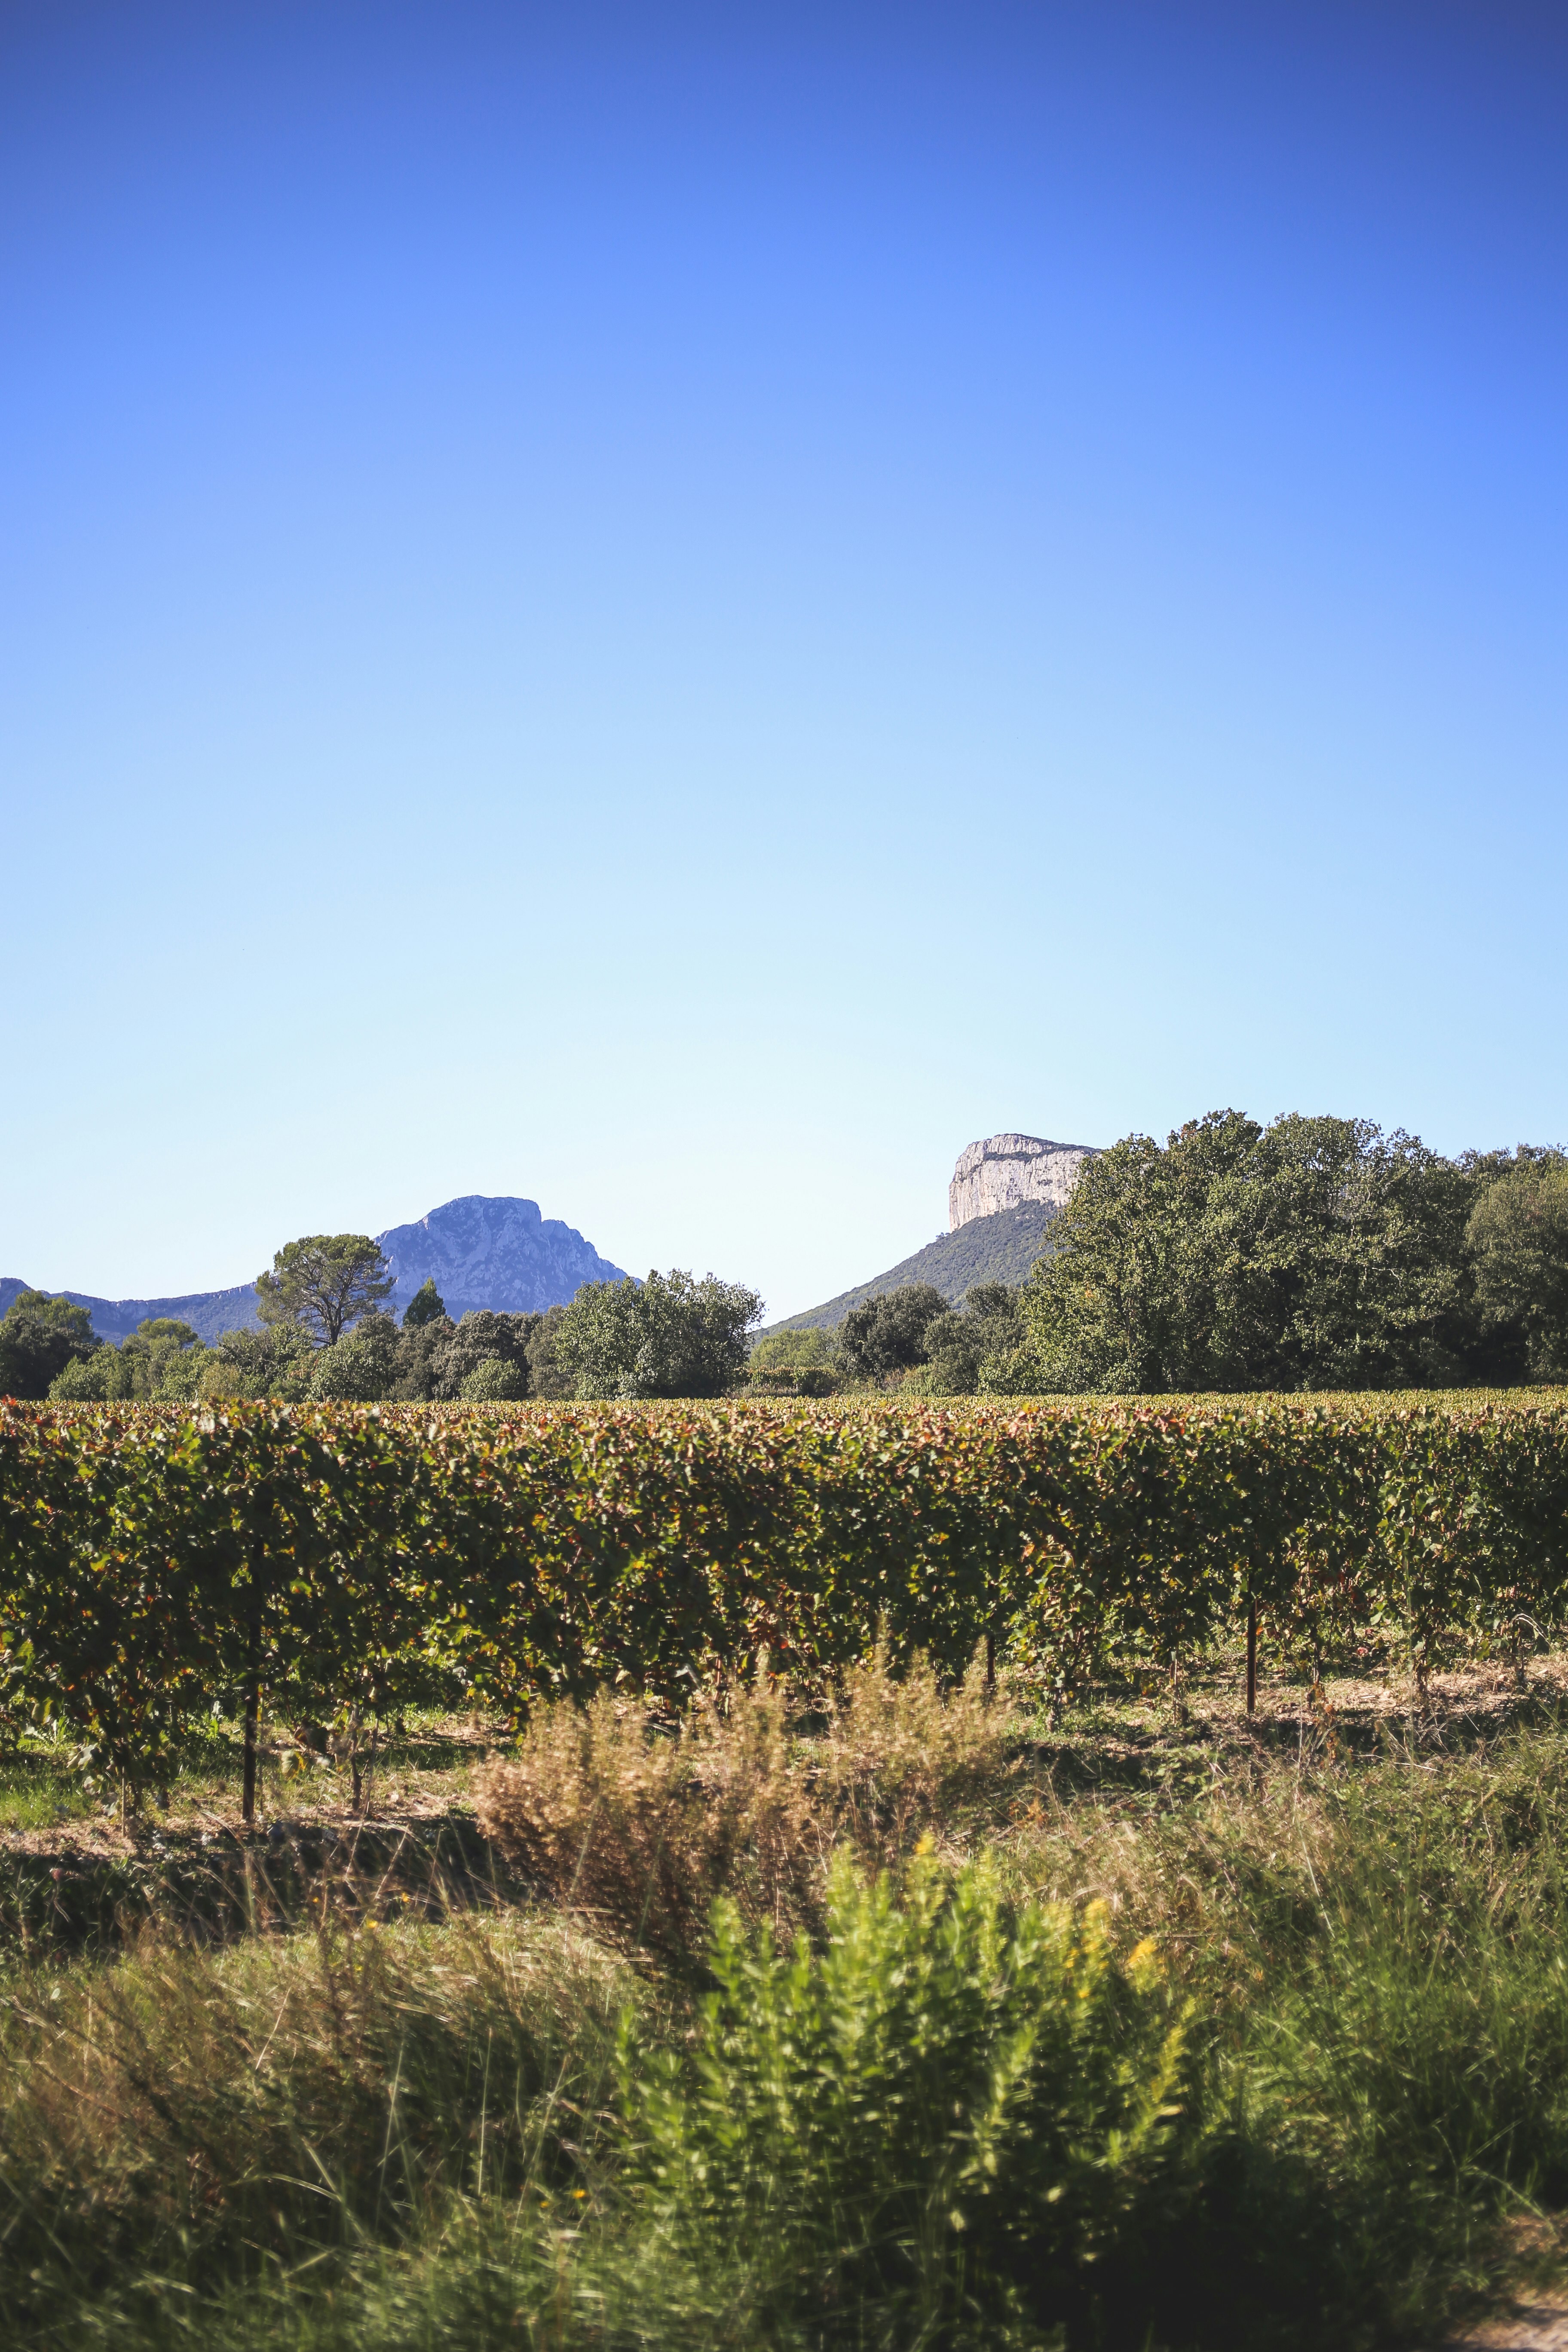 Vineyard in fall between mountains Pic Saint-Loup and Hortus